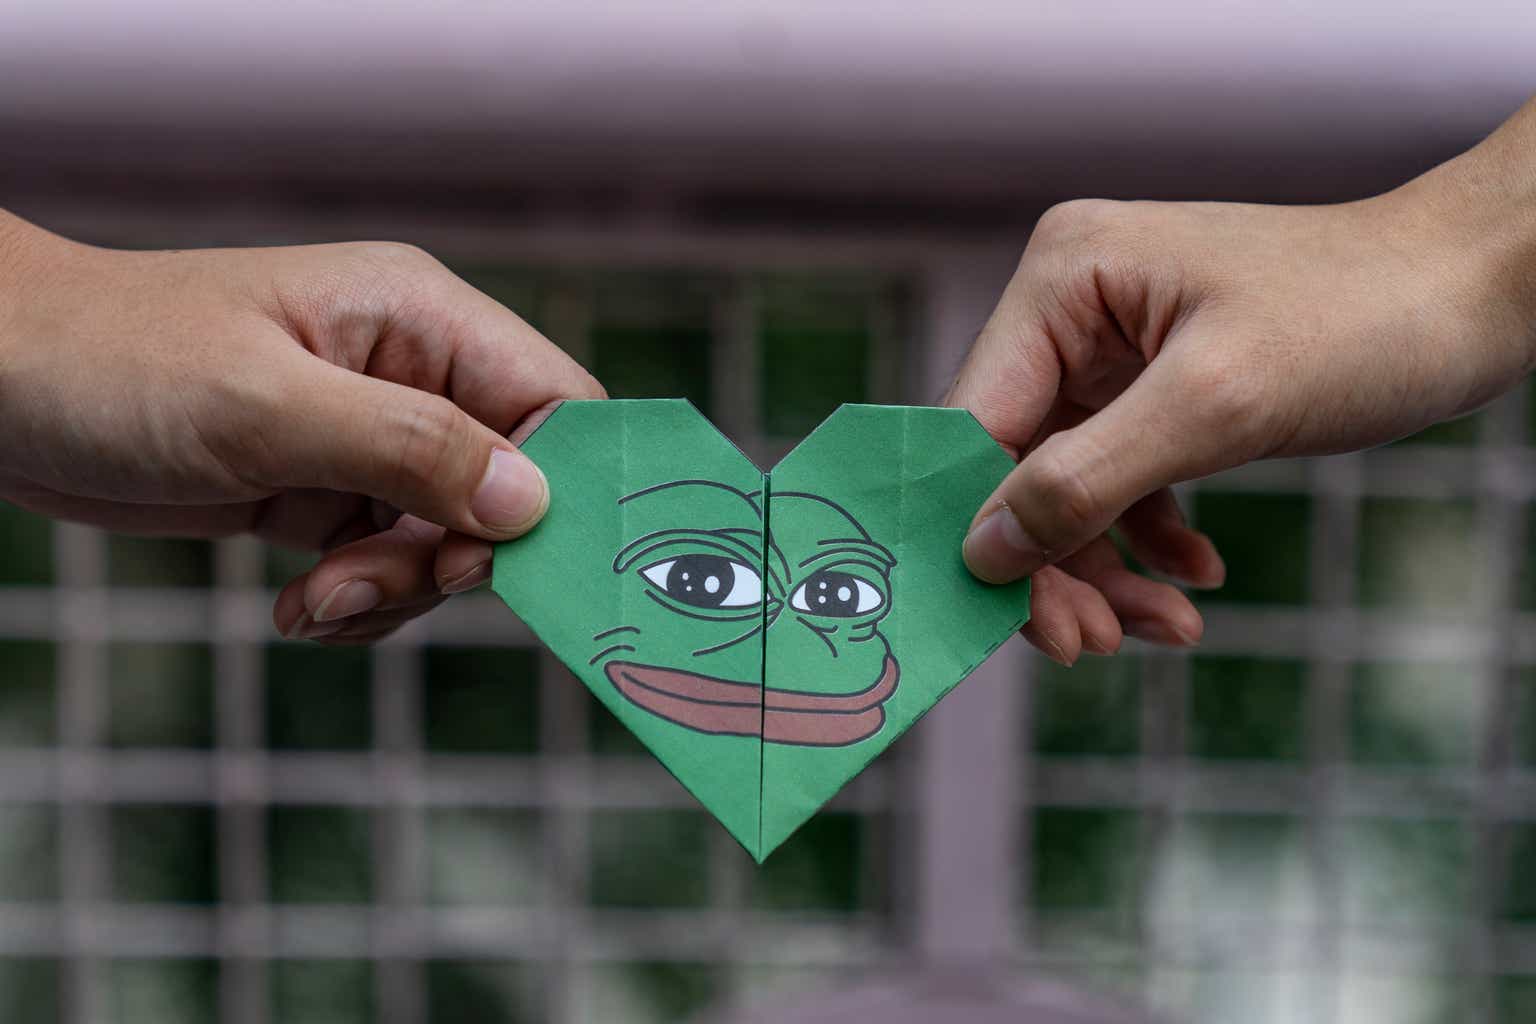 One of These Meme Coins Will Surely Surpass PEPE